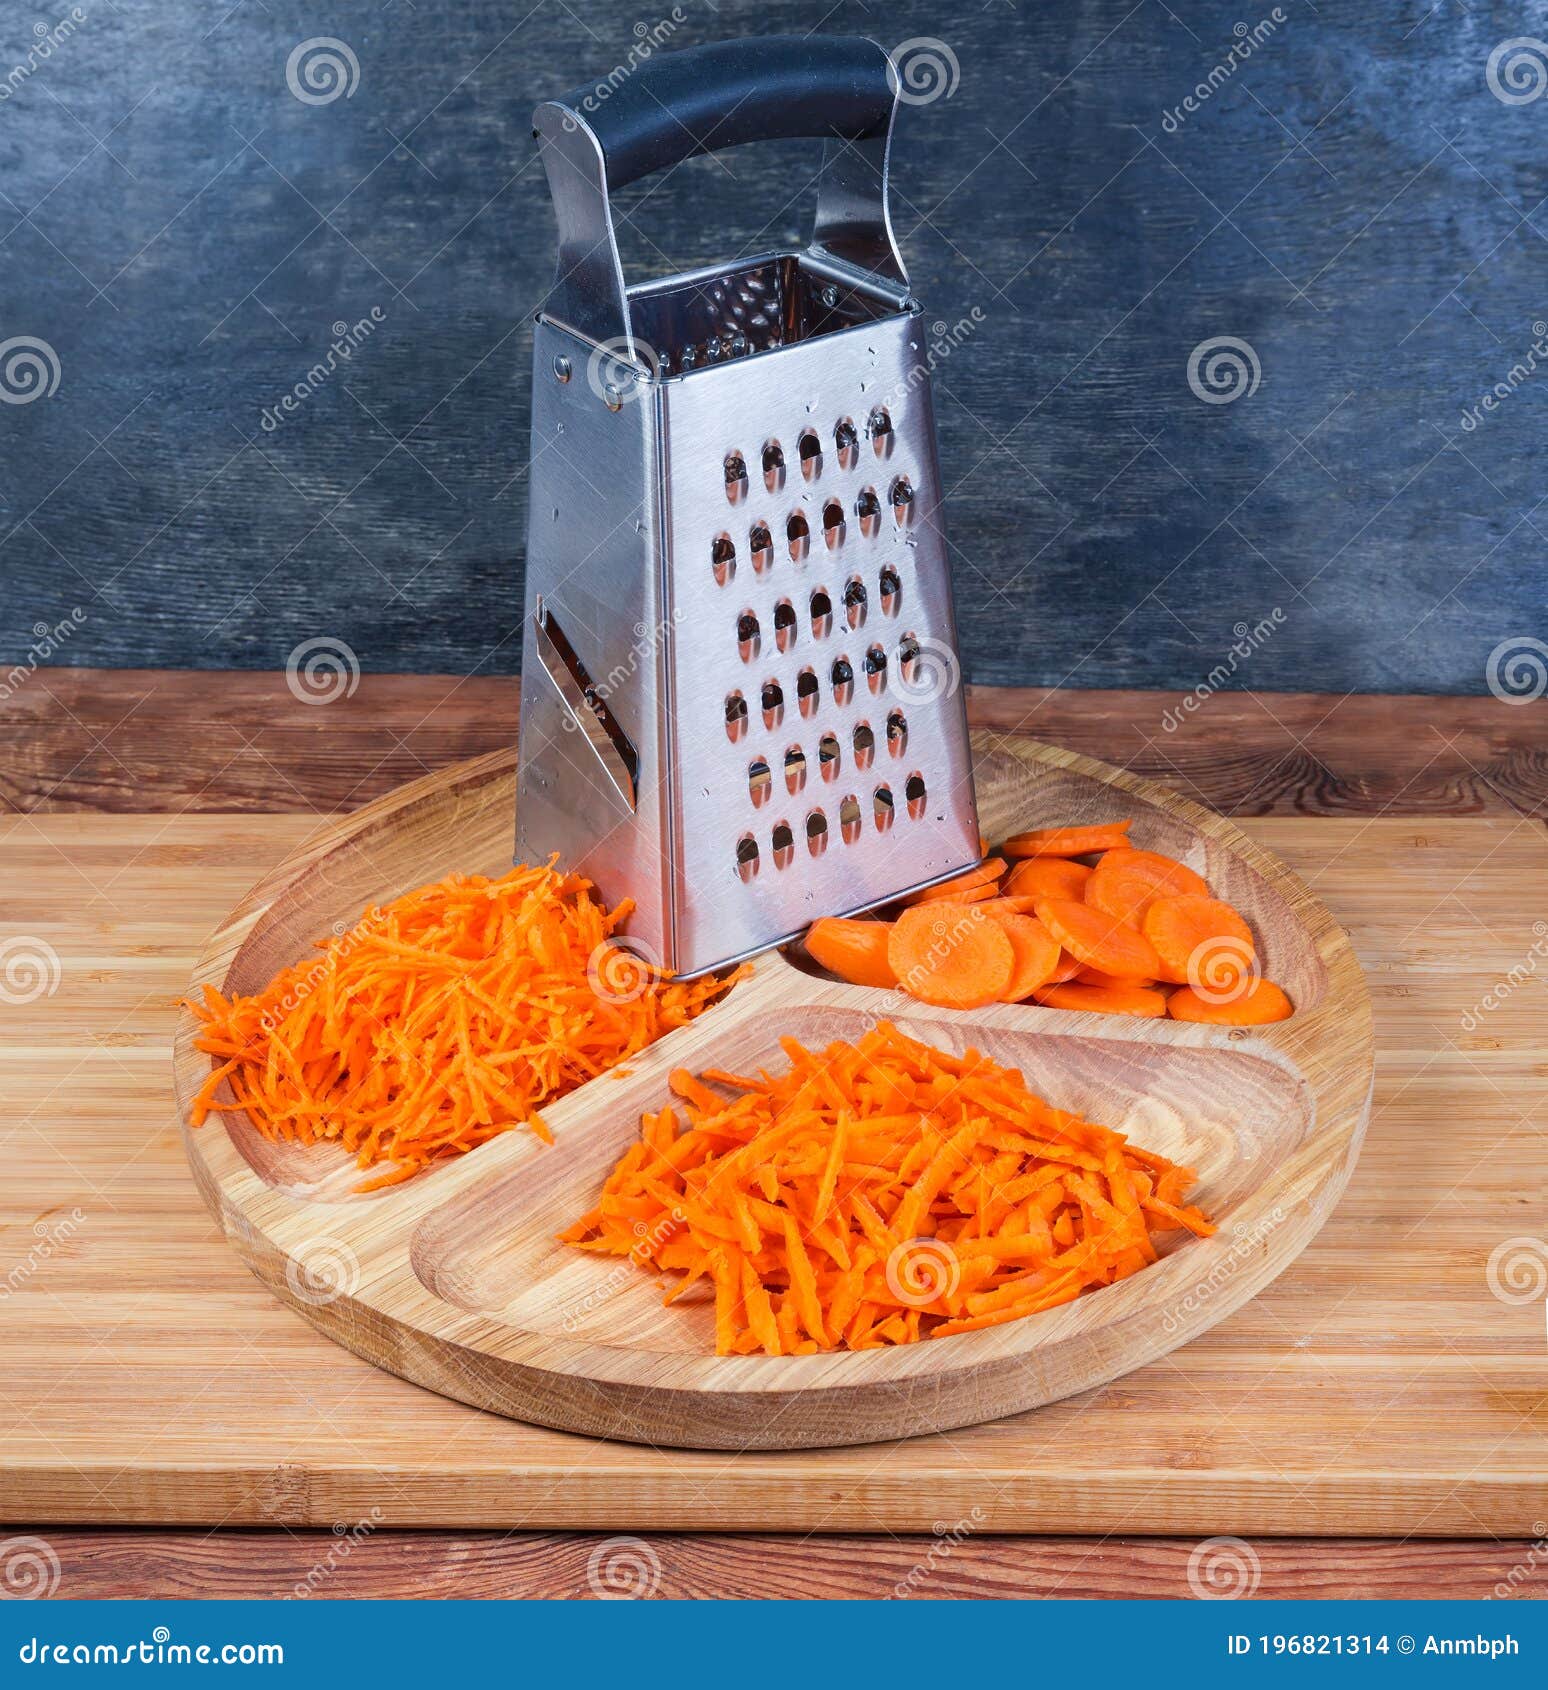 https://thumbs.dreamstime.com/z/kitchen-grater-carrots-grated-finely-coarsely-sliced-circles-stainless-steel-means-wooden-compartmental-dish-196821314.jpg